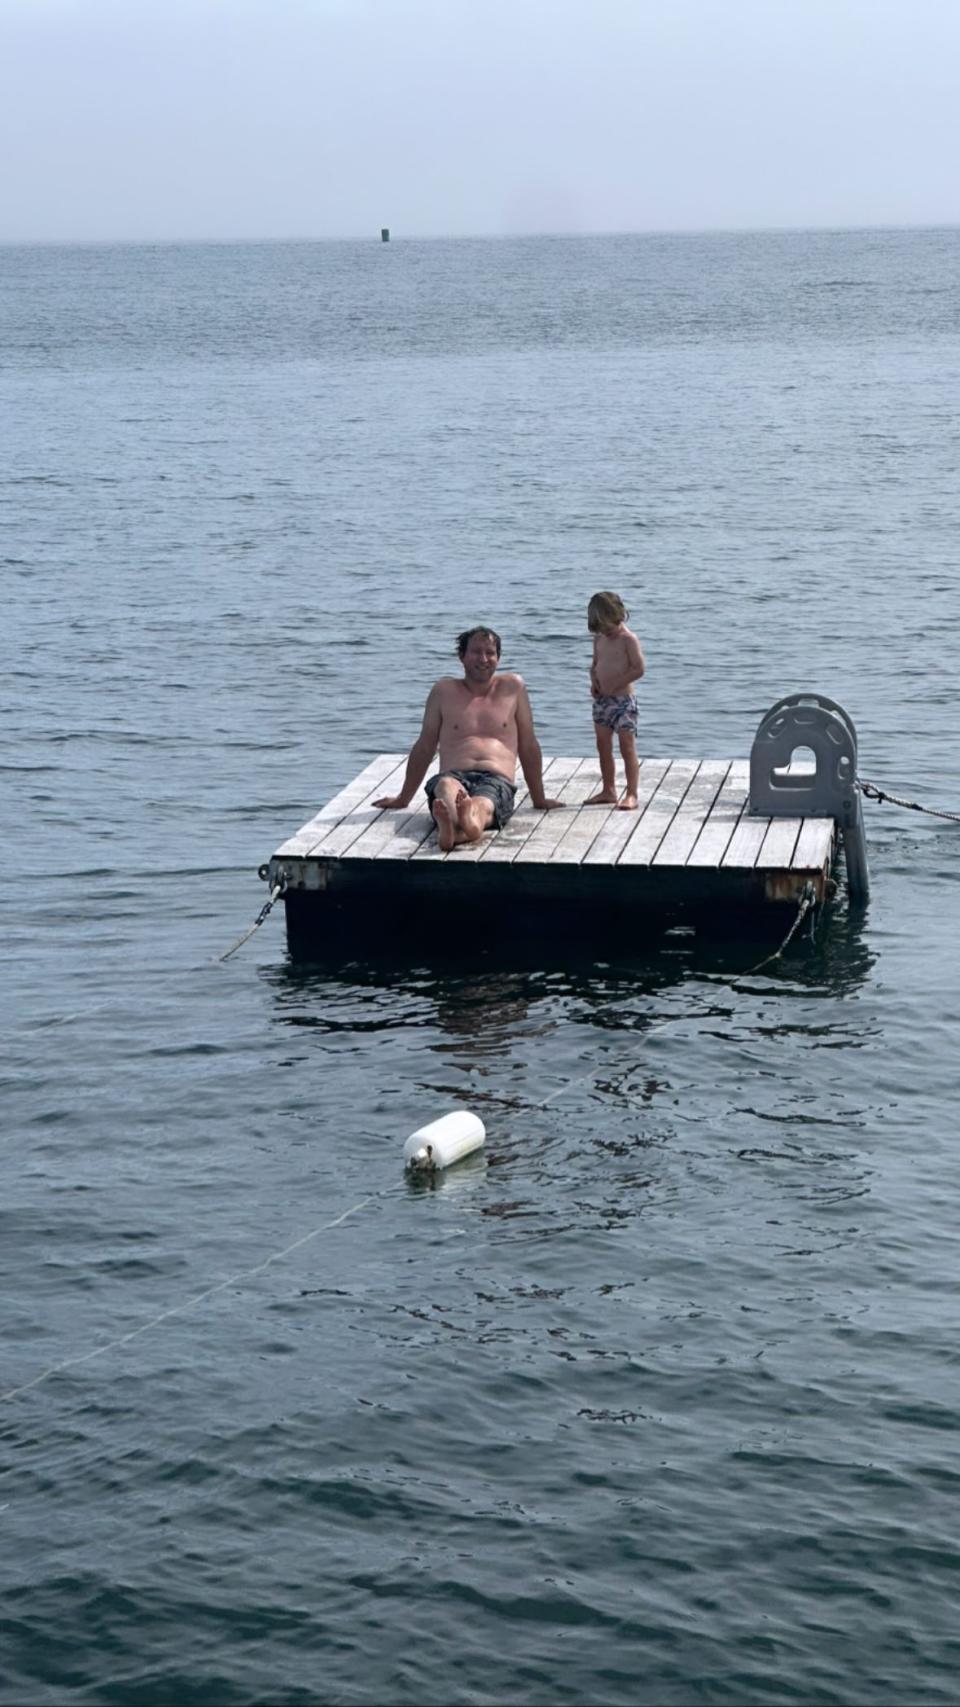 Jenna Bush Hager's husband, Henry, and their son, Hal, relax on a dock after a swim. (@jennabhager via Instagram)